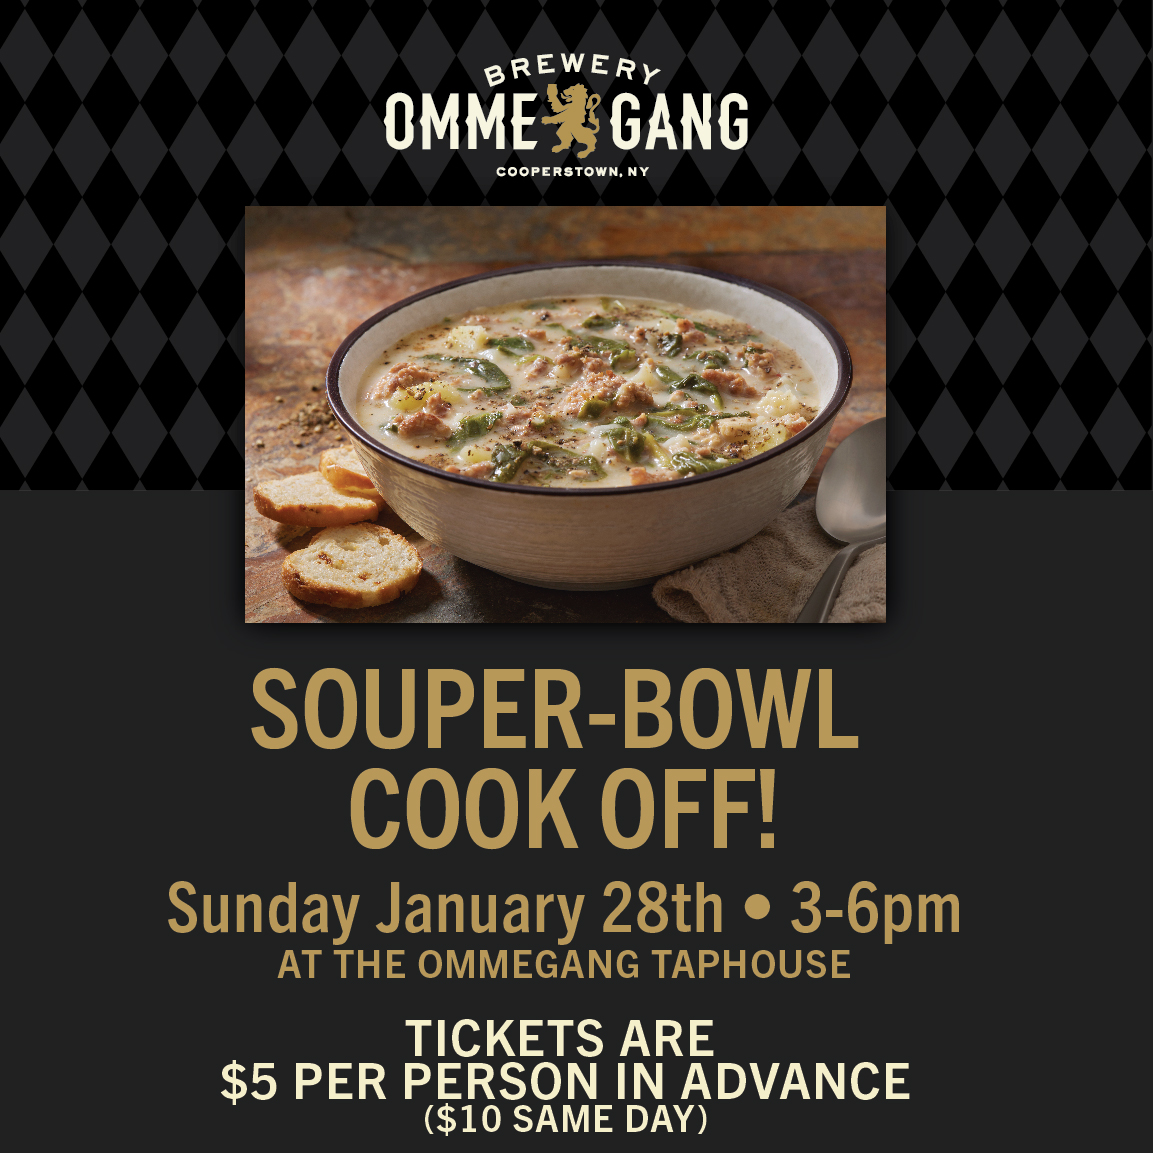 Souper Bowl Cook-off at The Ommegang Tap House Restaurant